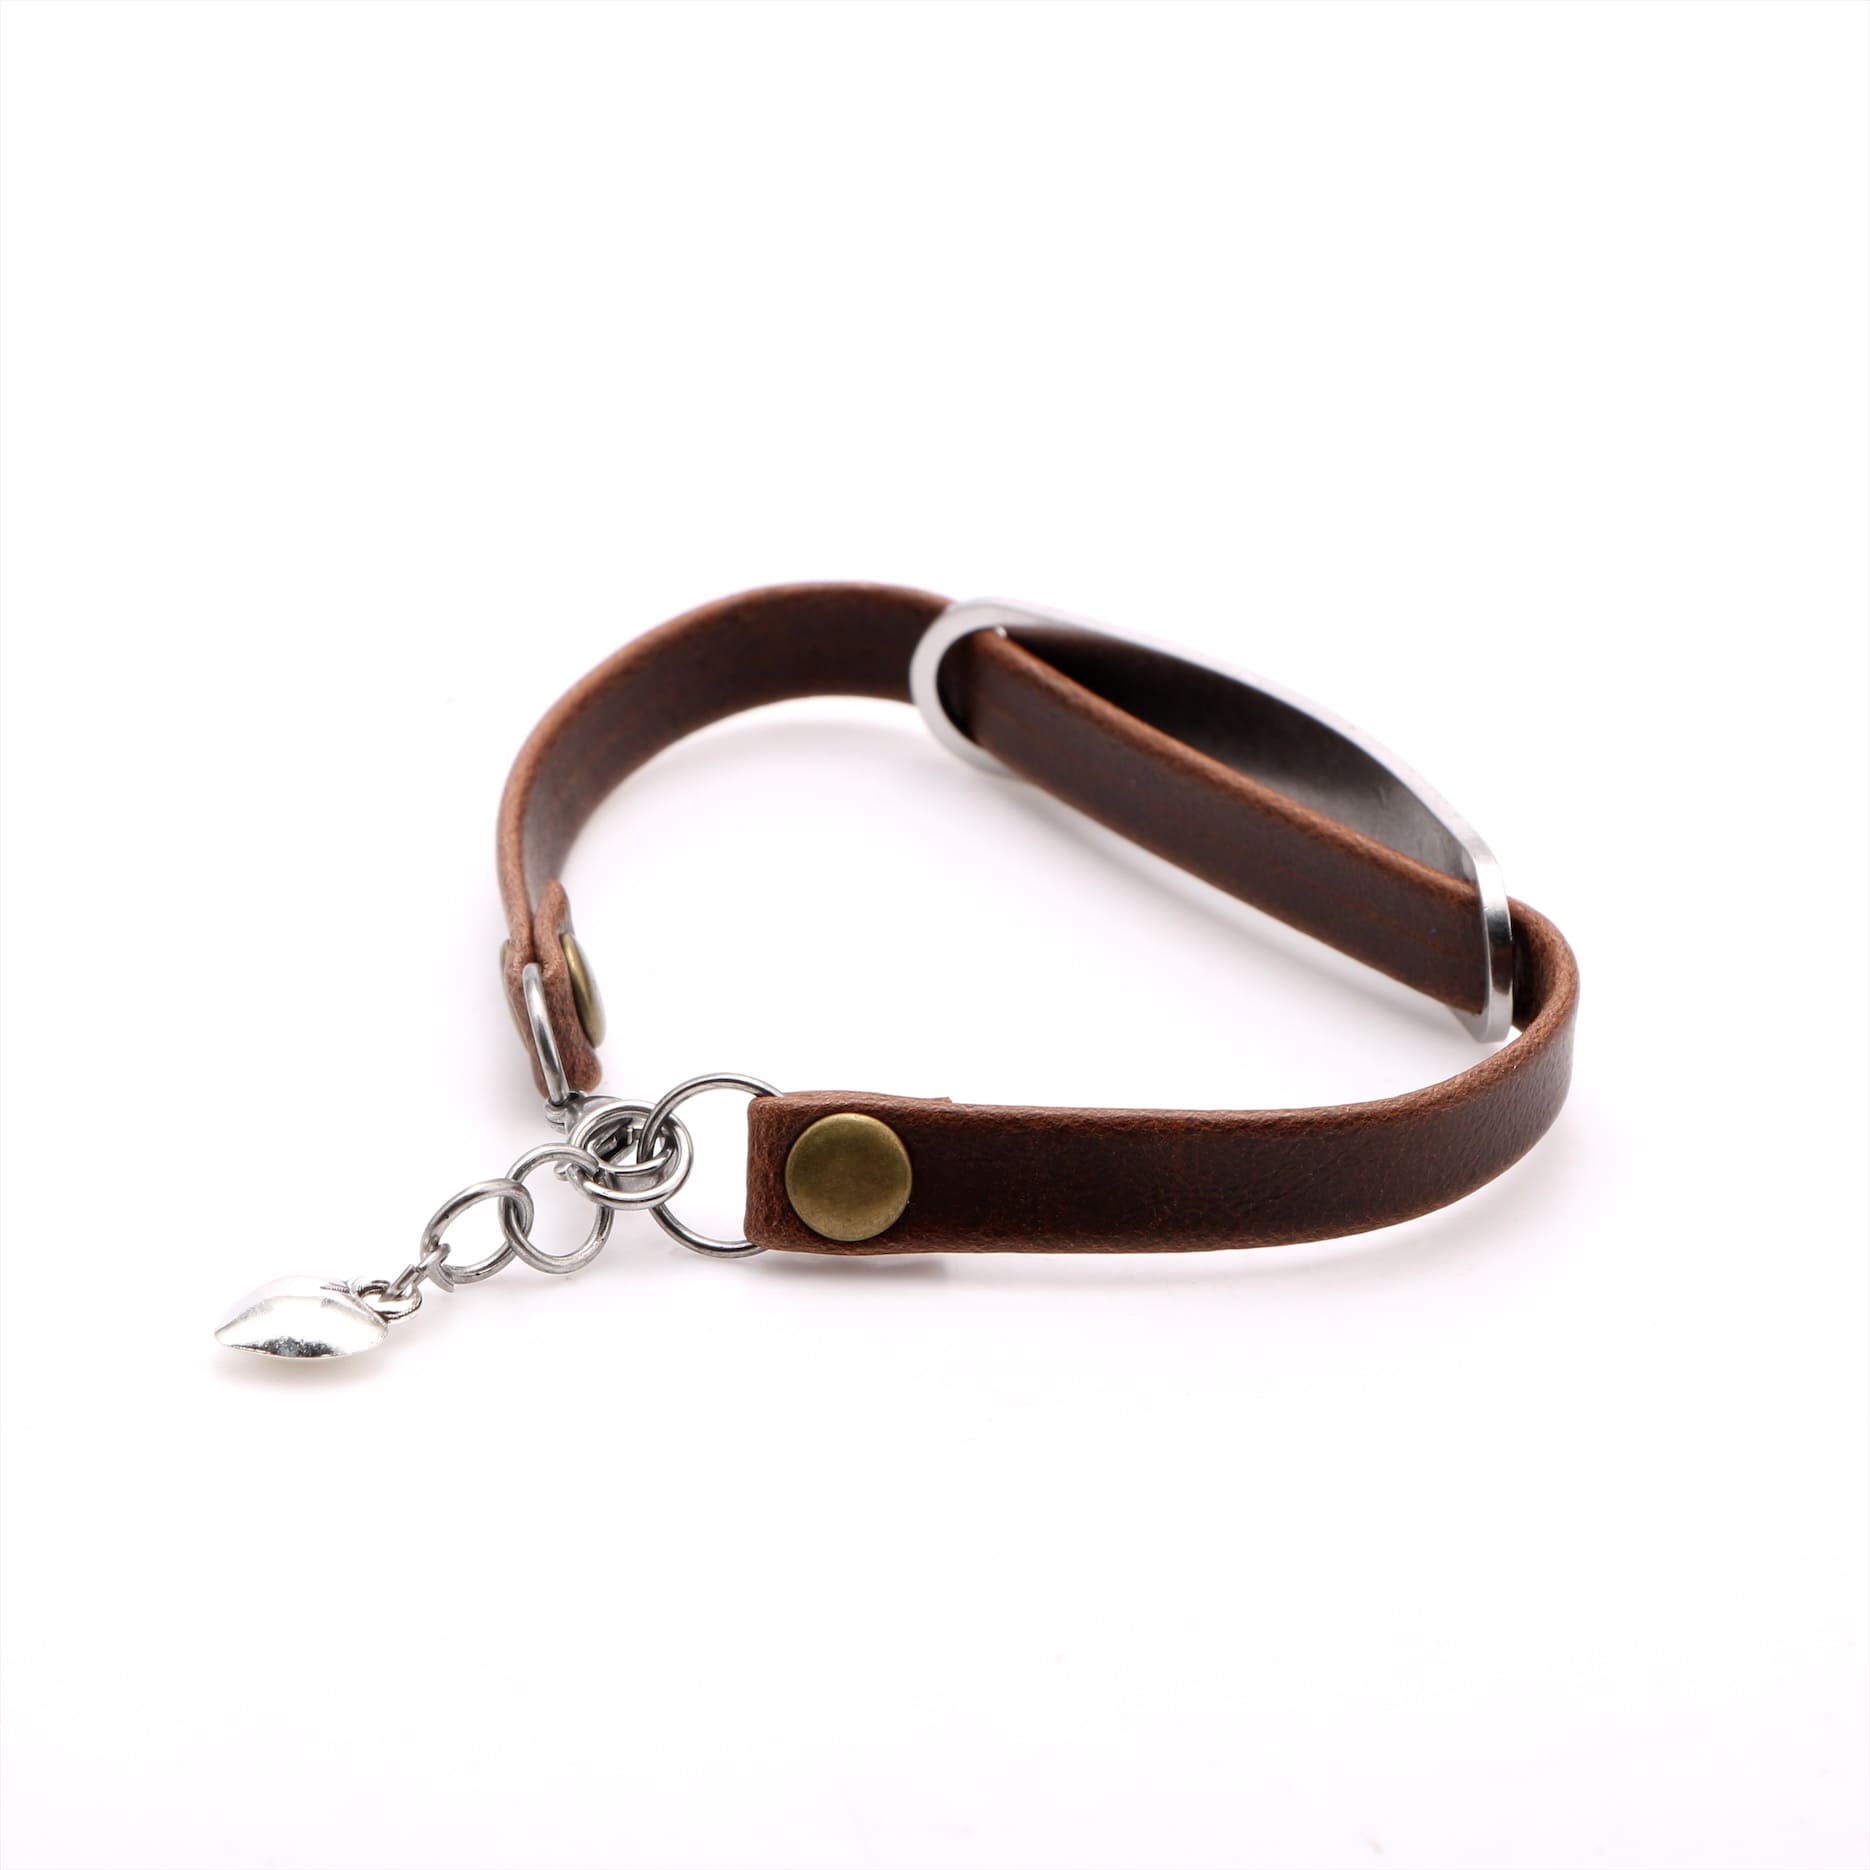 Stronger Than The Storm - Inspirational Leather Bracelet